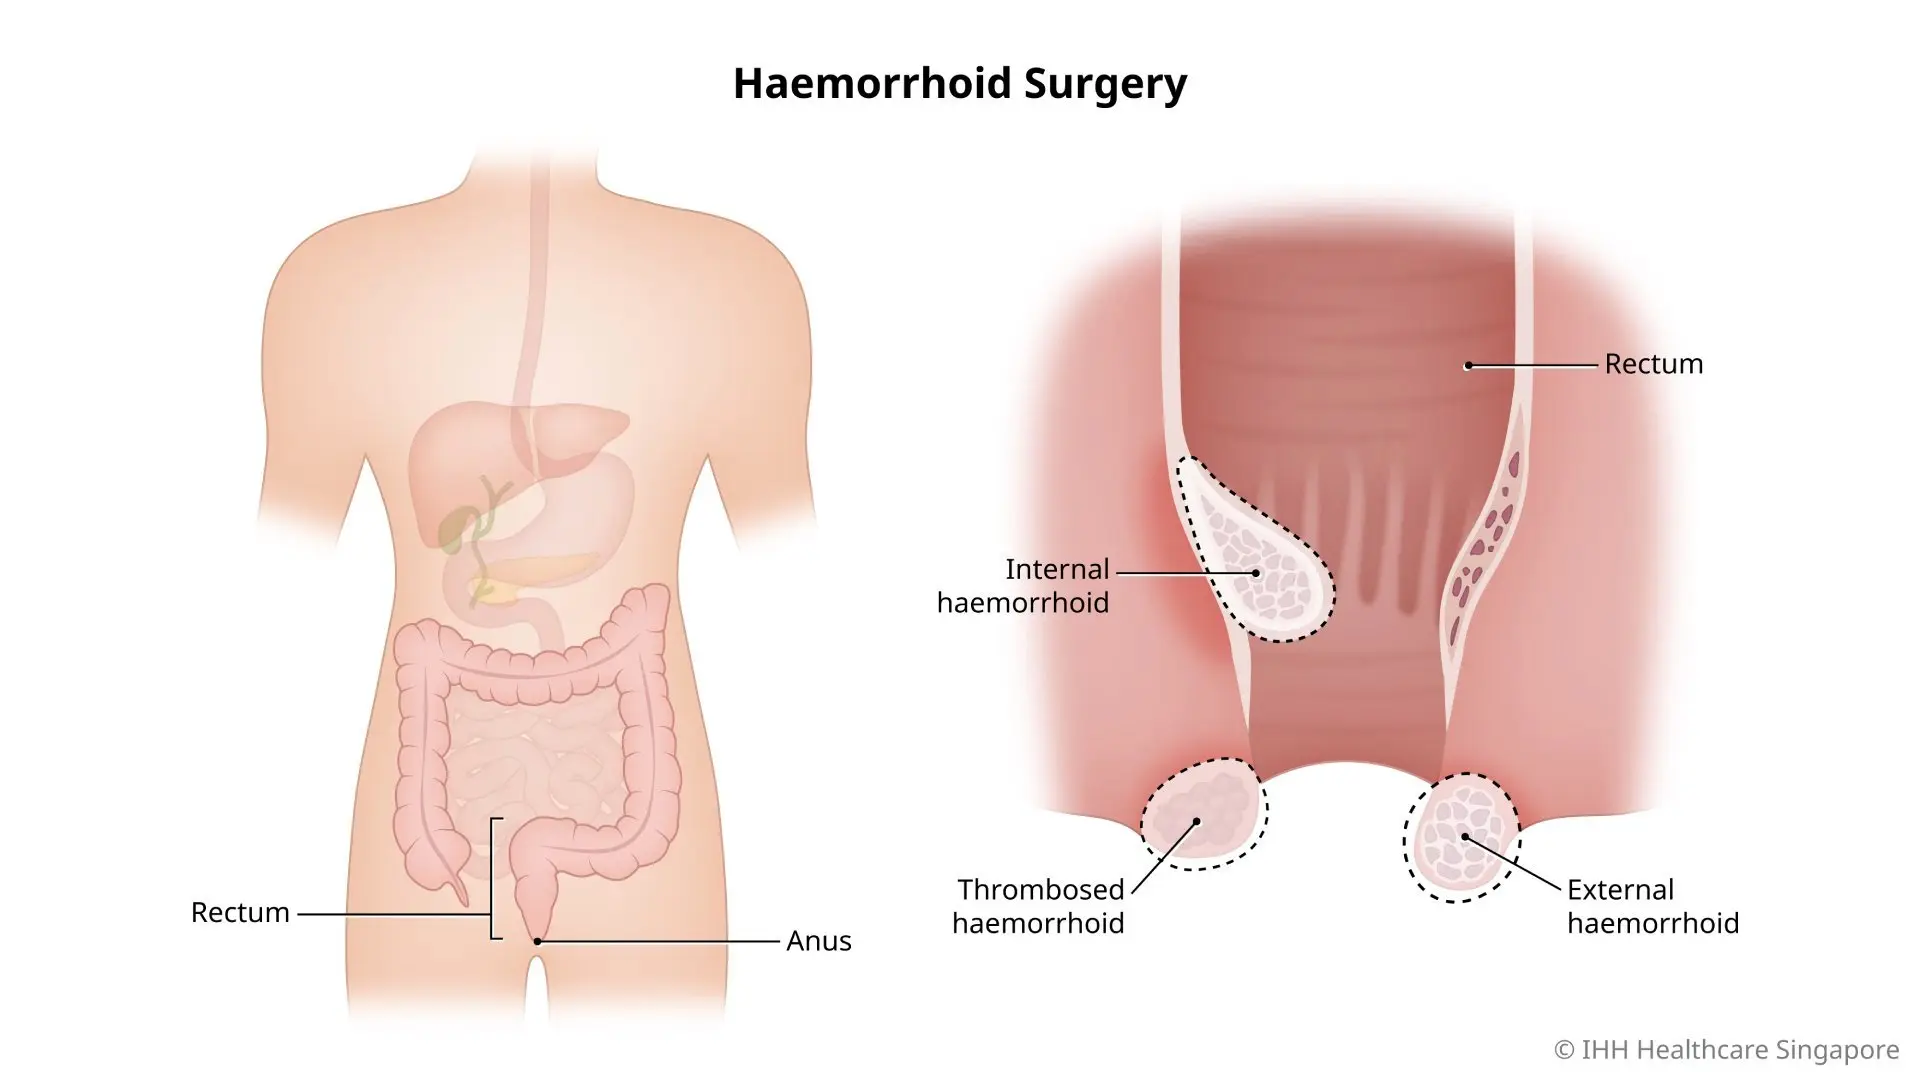 Illustration of haemorrhoid surgery, including internal, thrombosed, and external haemorrhoid surgery.